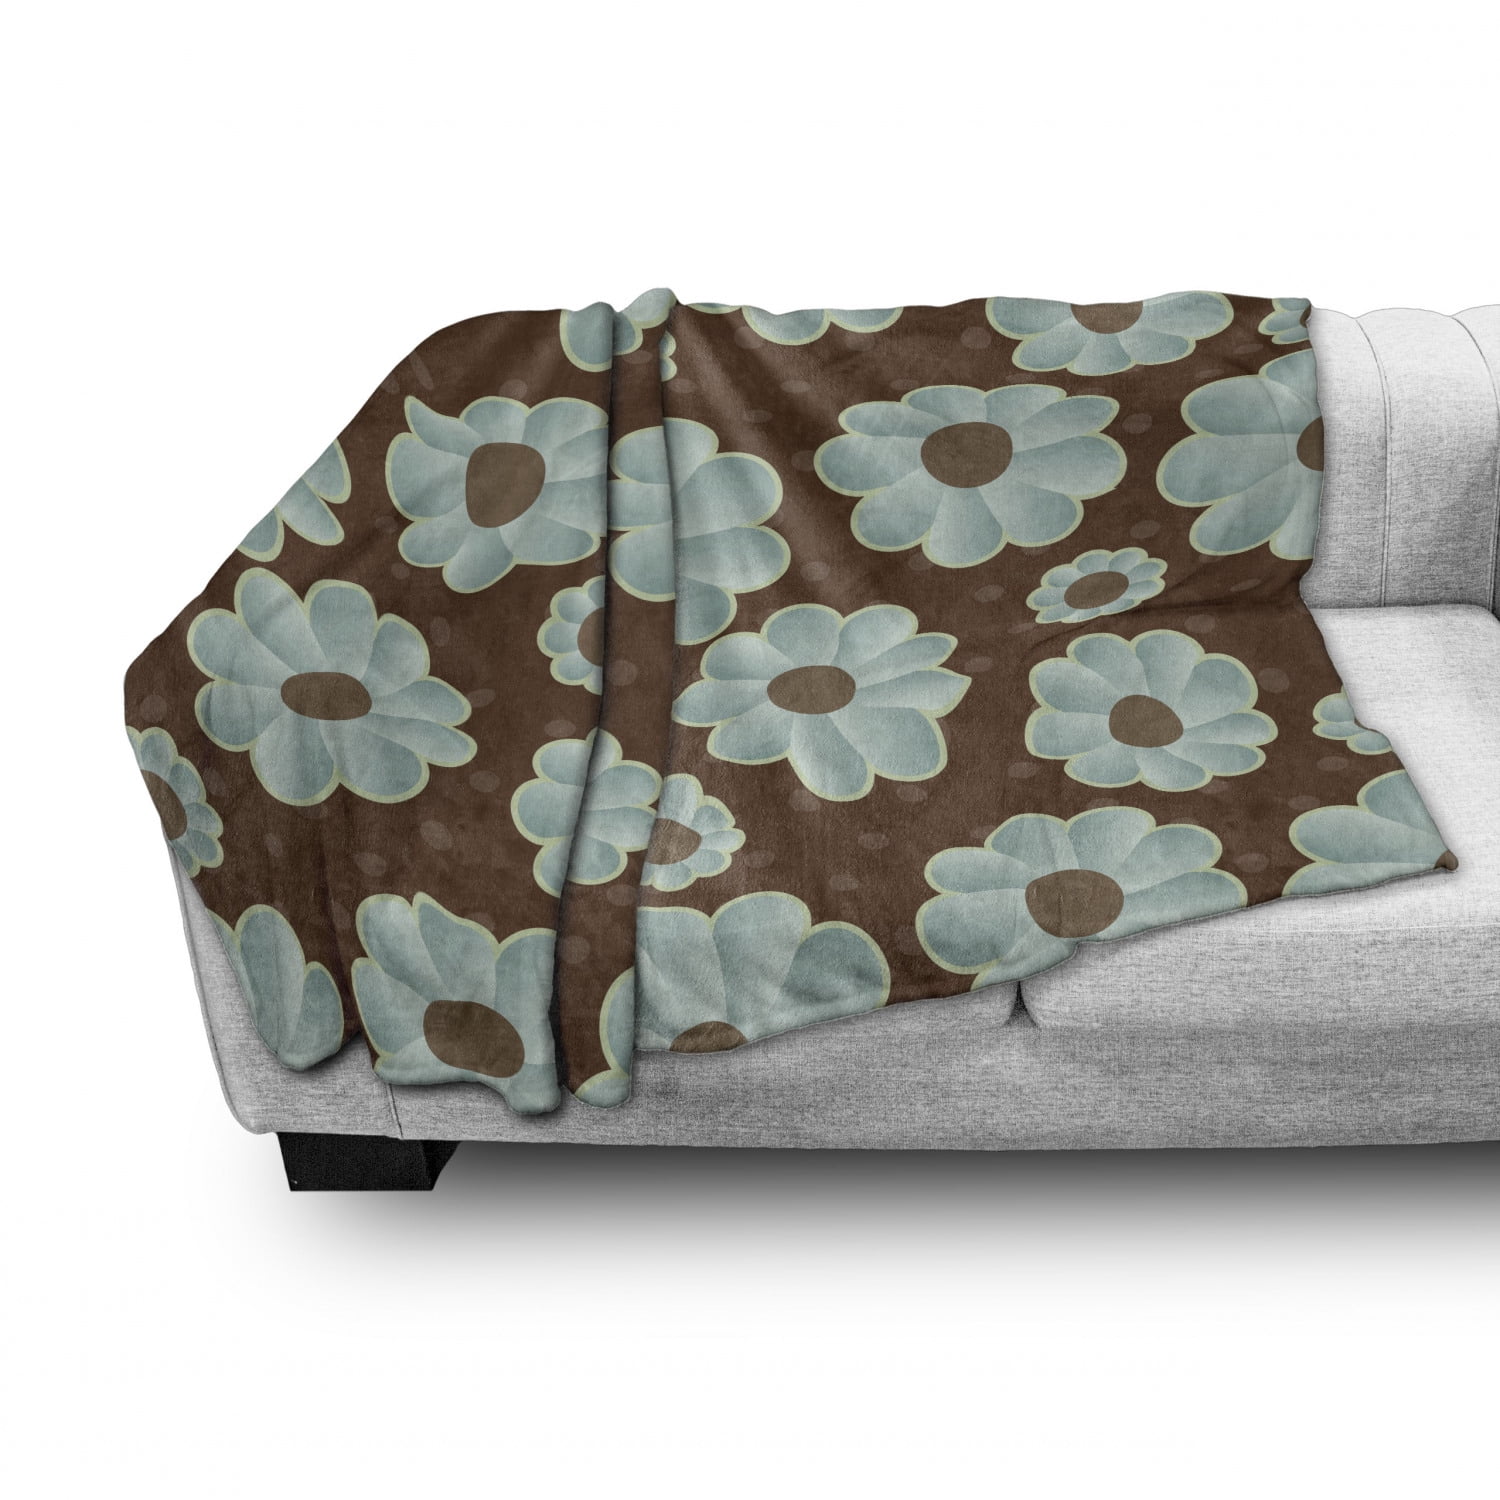 Cozy Plush for Indoor and Outdoor Use Ambesonne Brown and Blue Soft Flannel Fleece Throw Blanket Retro Daisy Pattern with Polka Dot Background Abstract Design 60 x 80 Brown Pale Seafoam Umber 